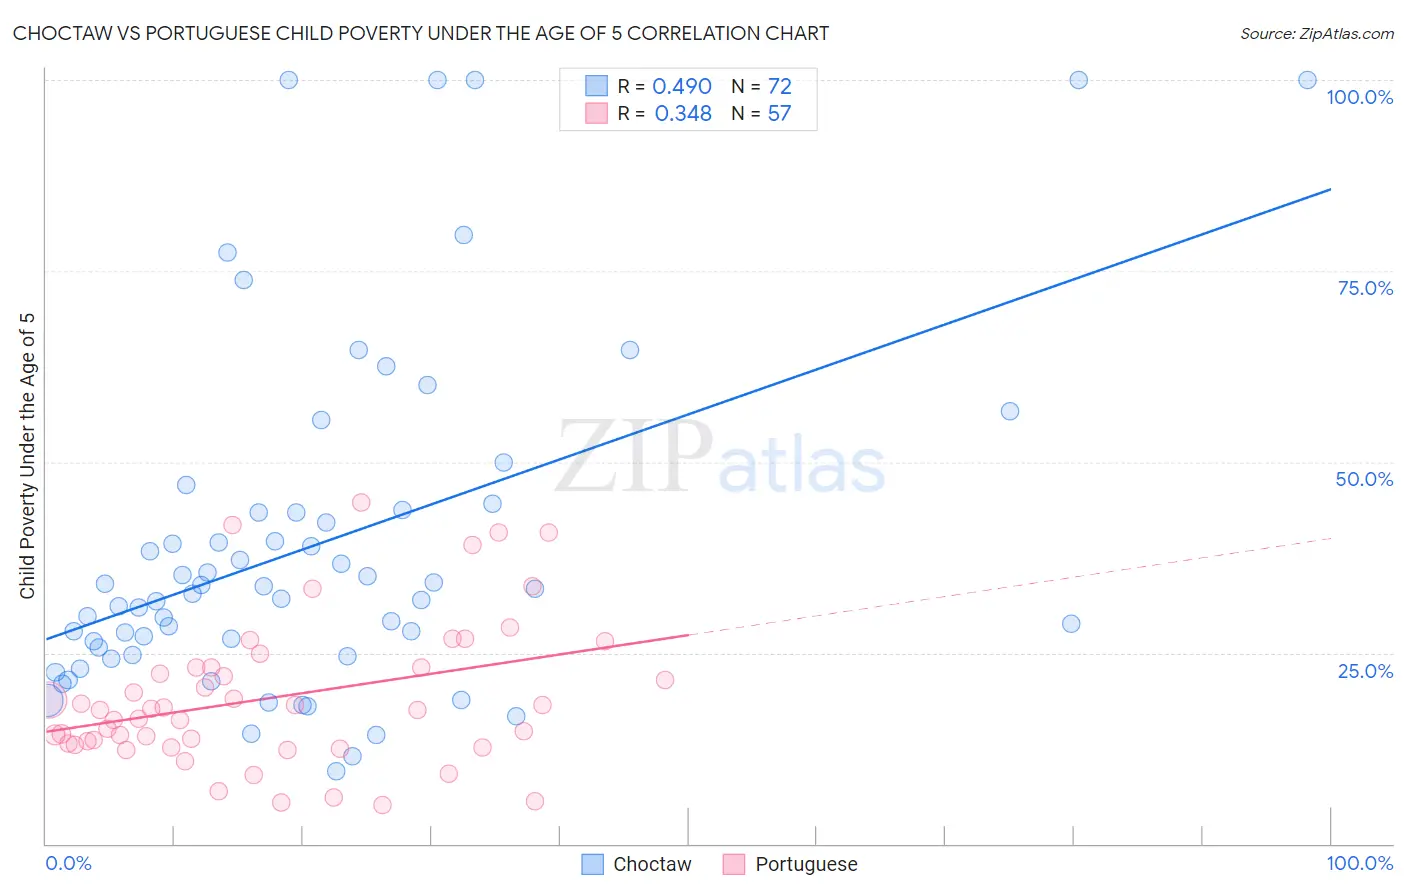 Choctaw vs Portuguese Child Poverty Under the Age of 5